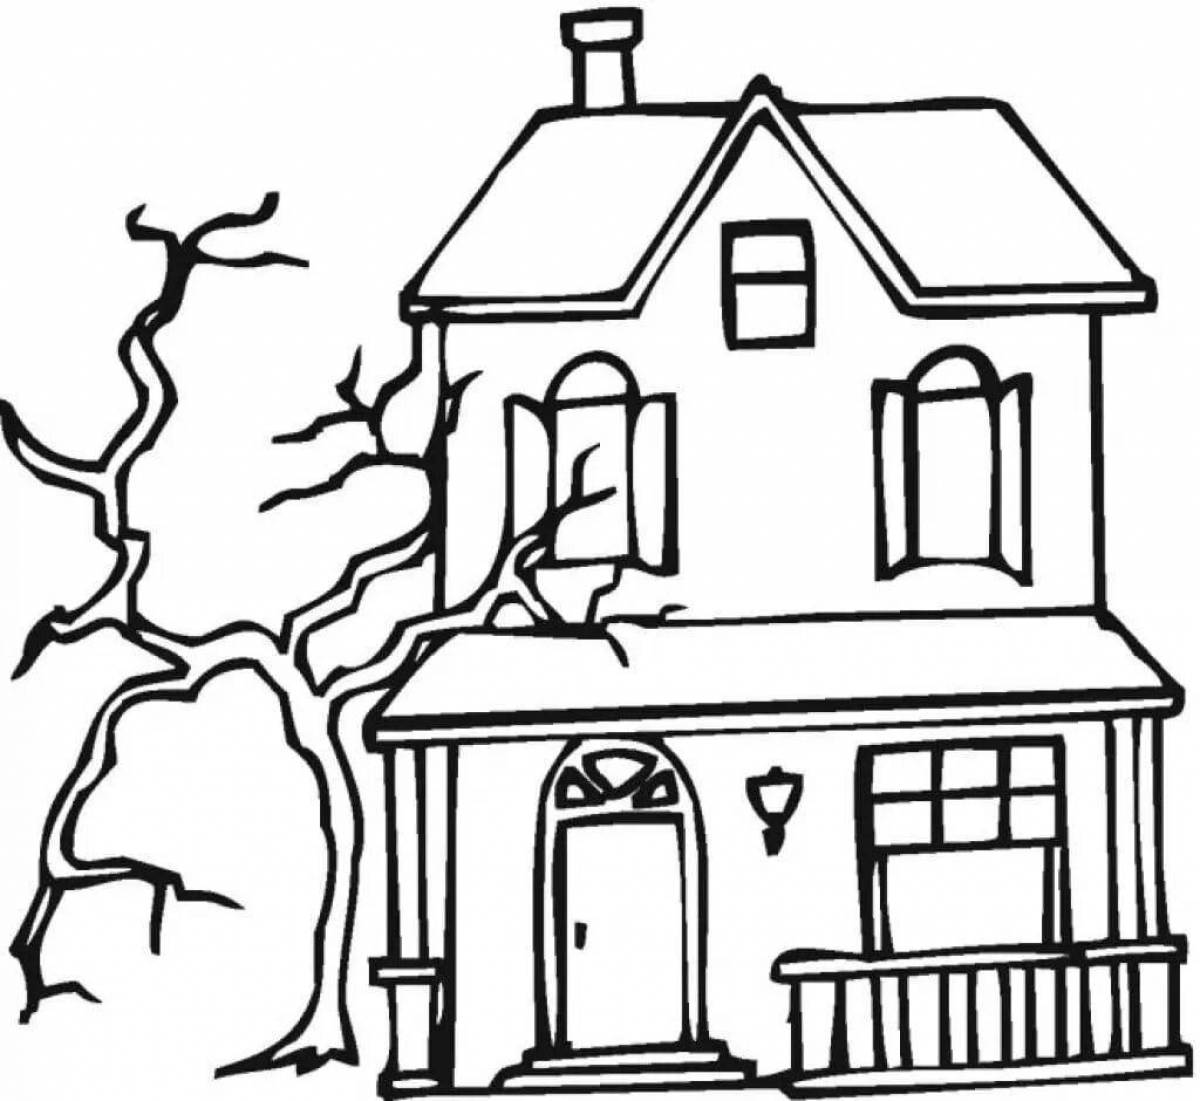 Surprise coloring book my house for kids